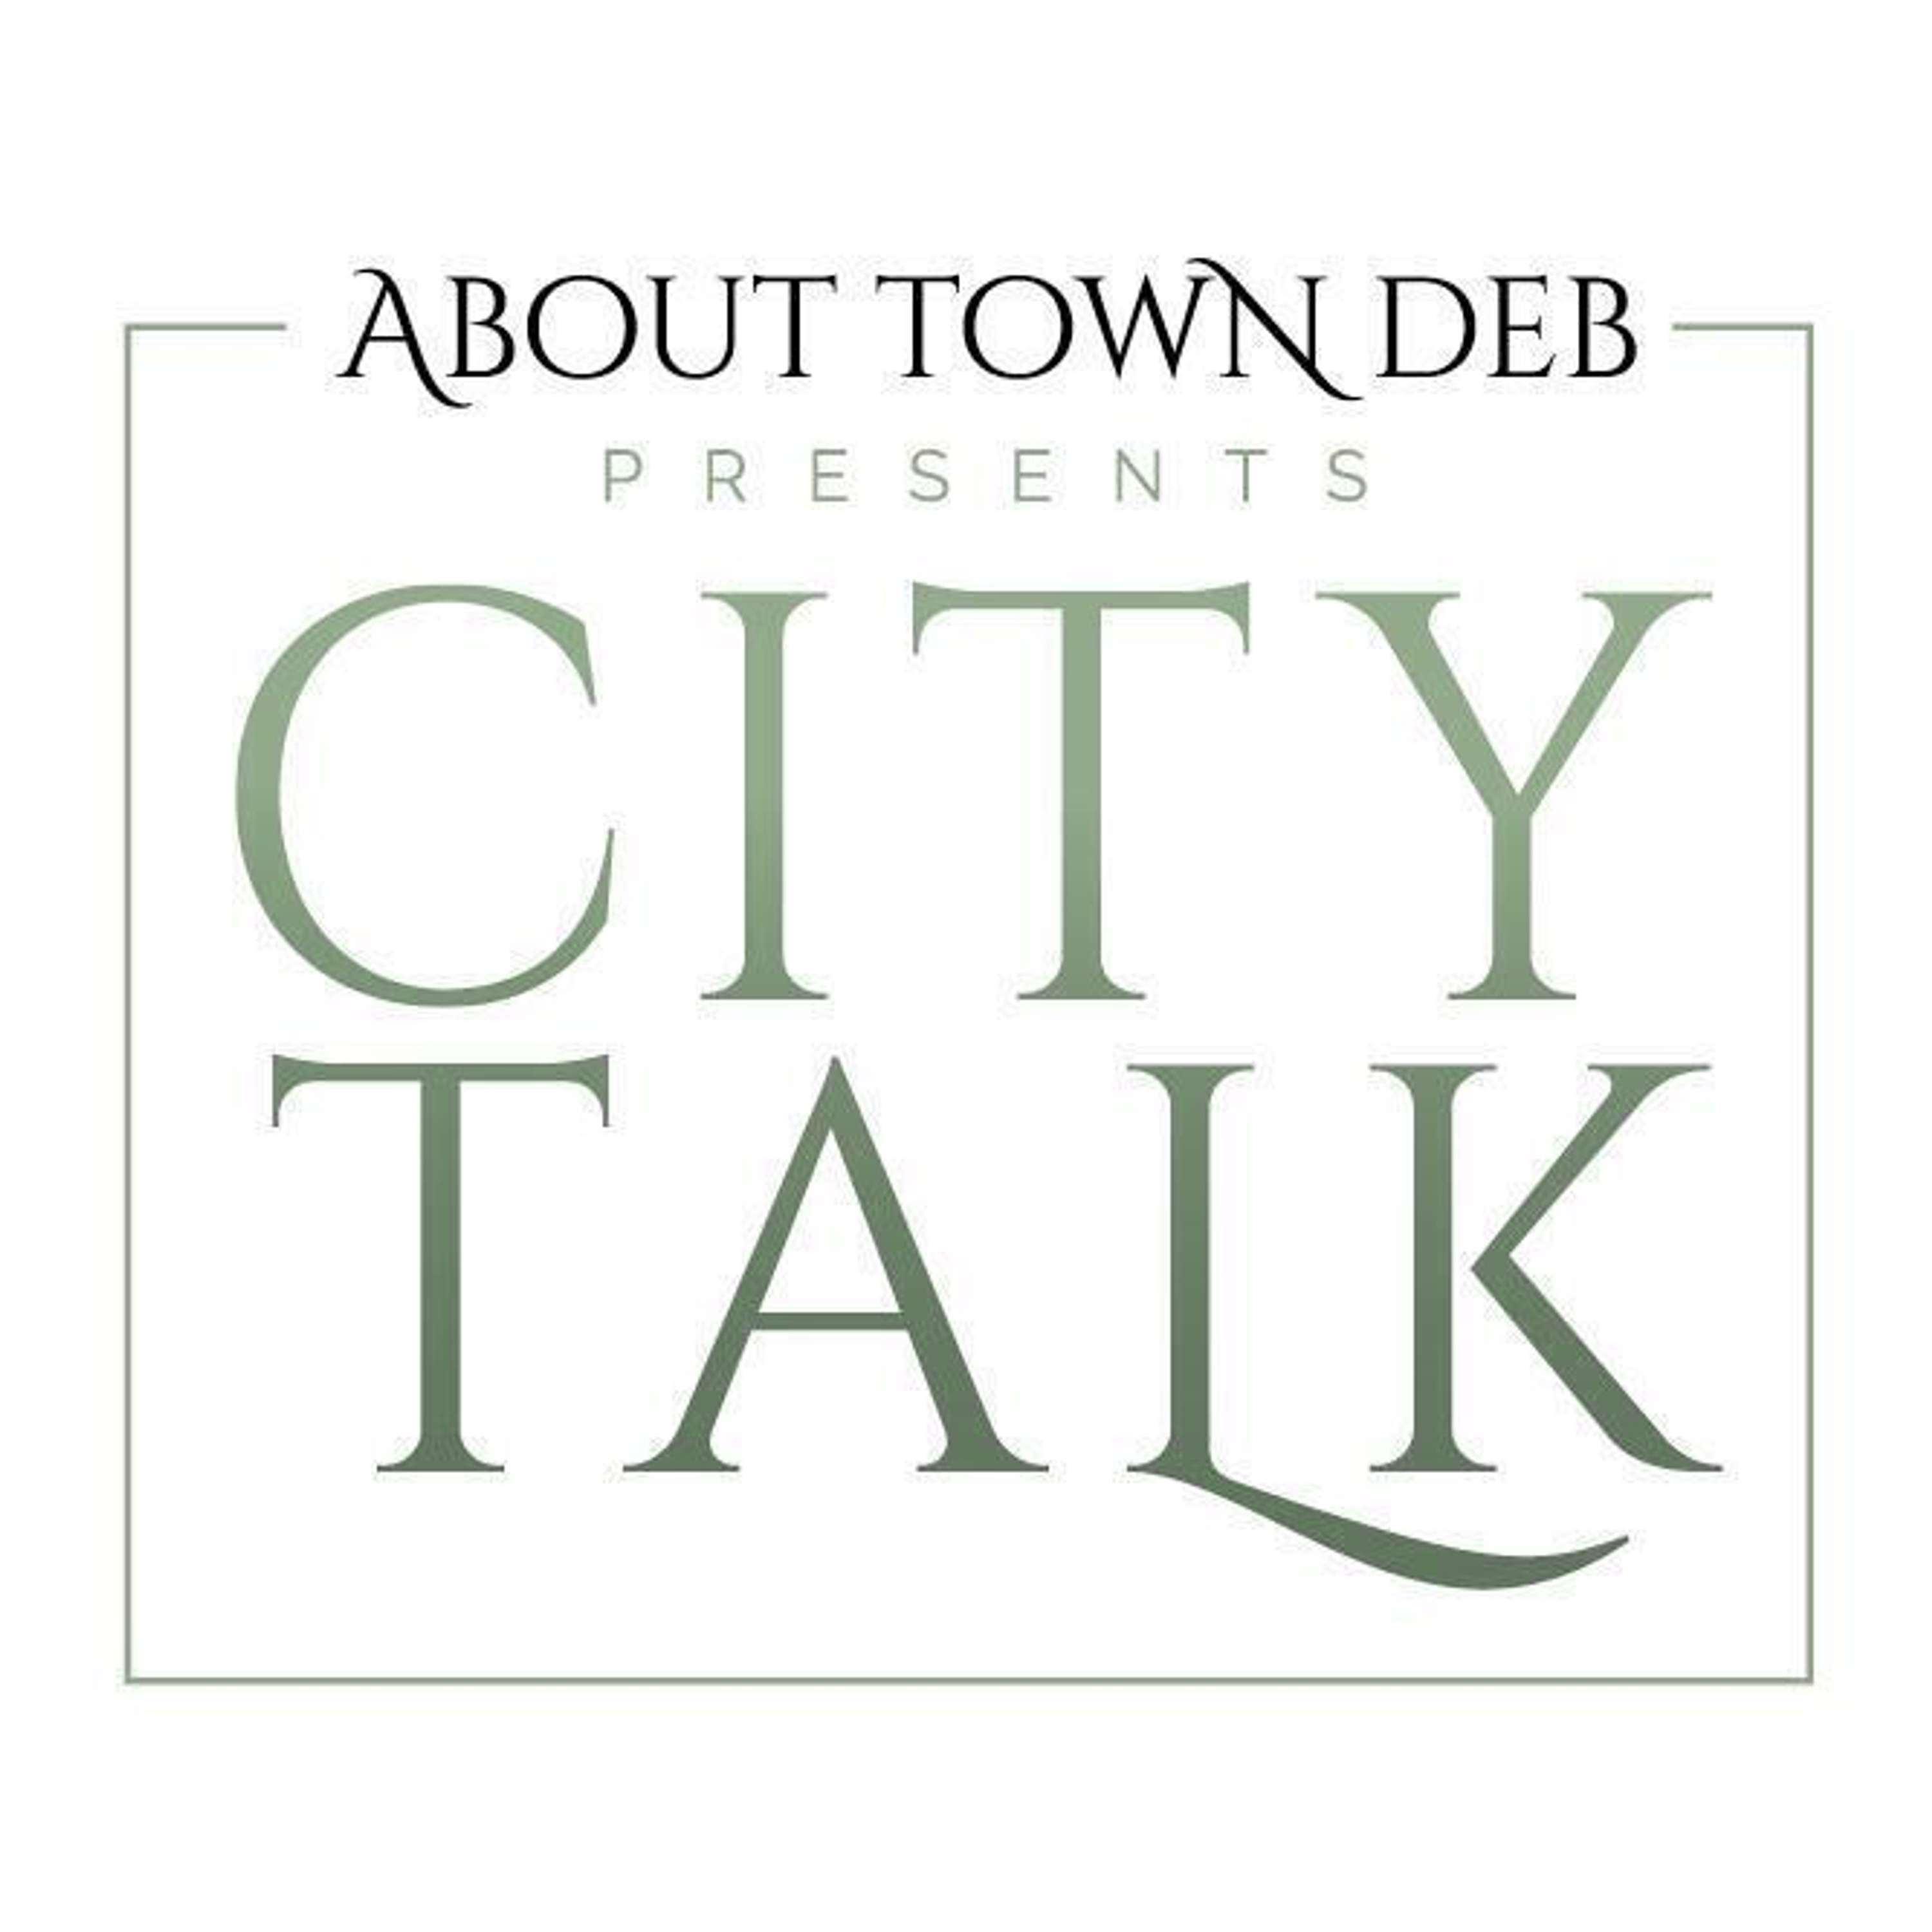 About Town Deb Presents City Talk: Keeping It Real In March with Amber MF Hale (03/01/23)